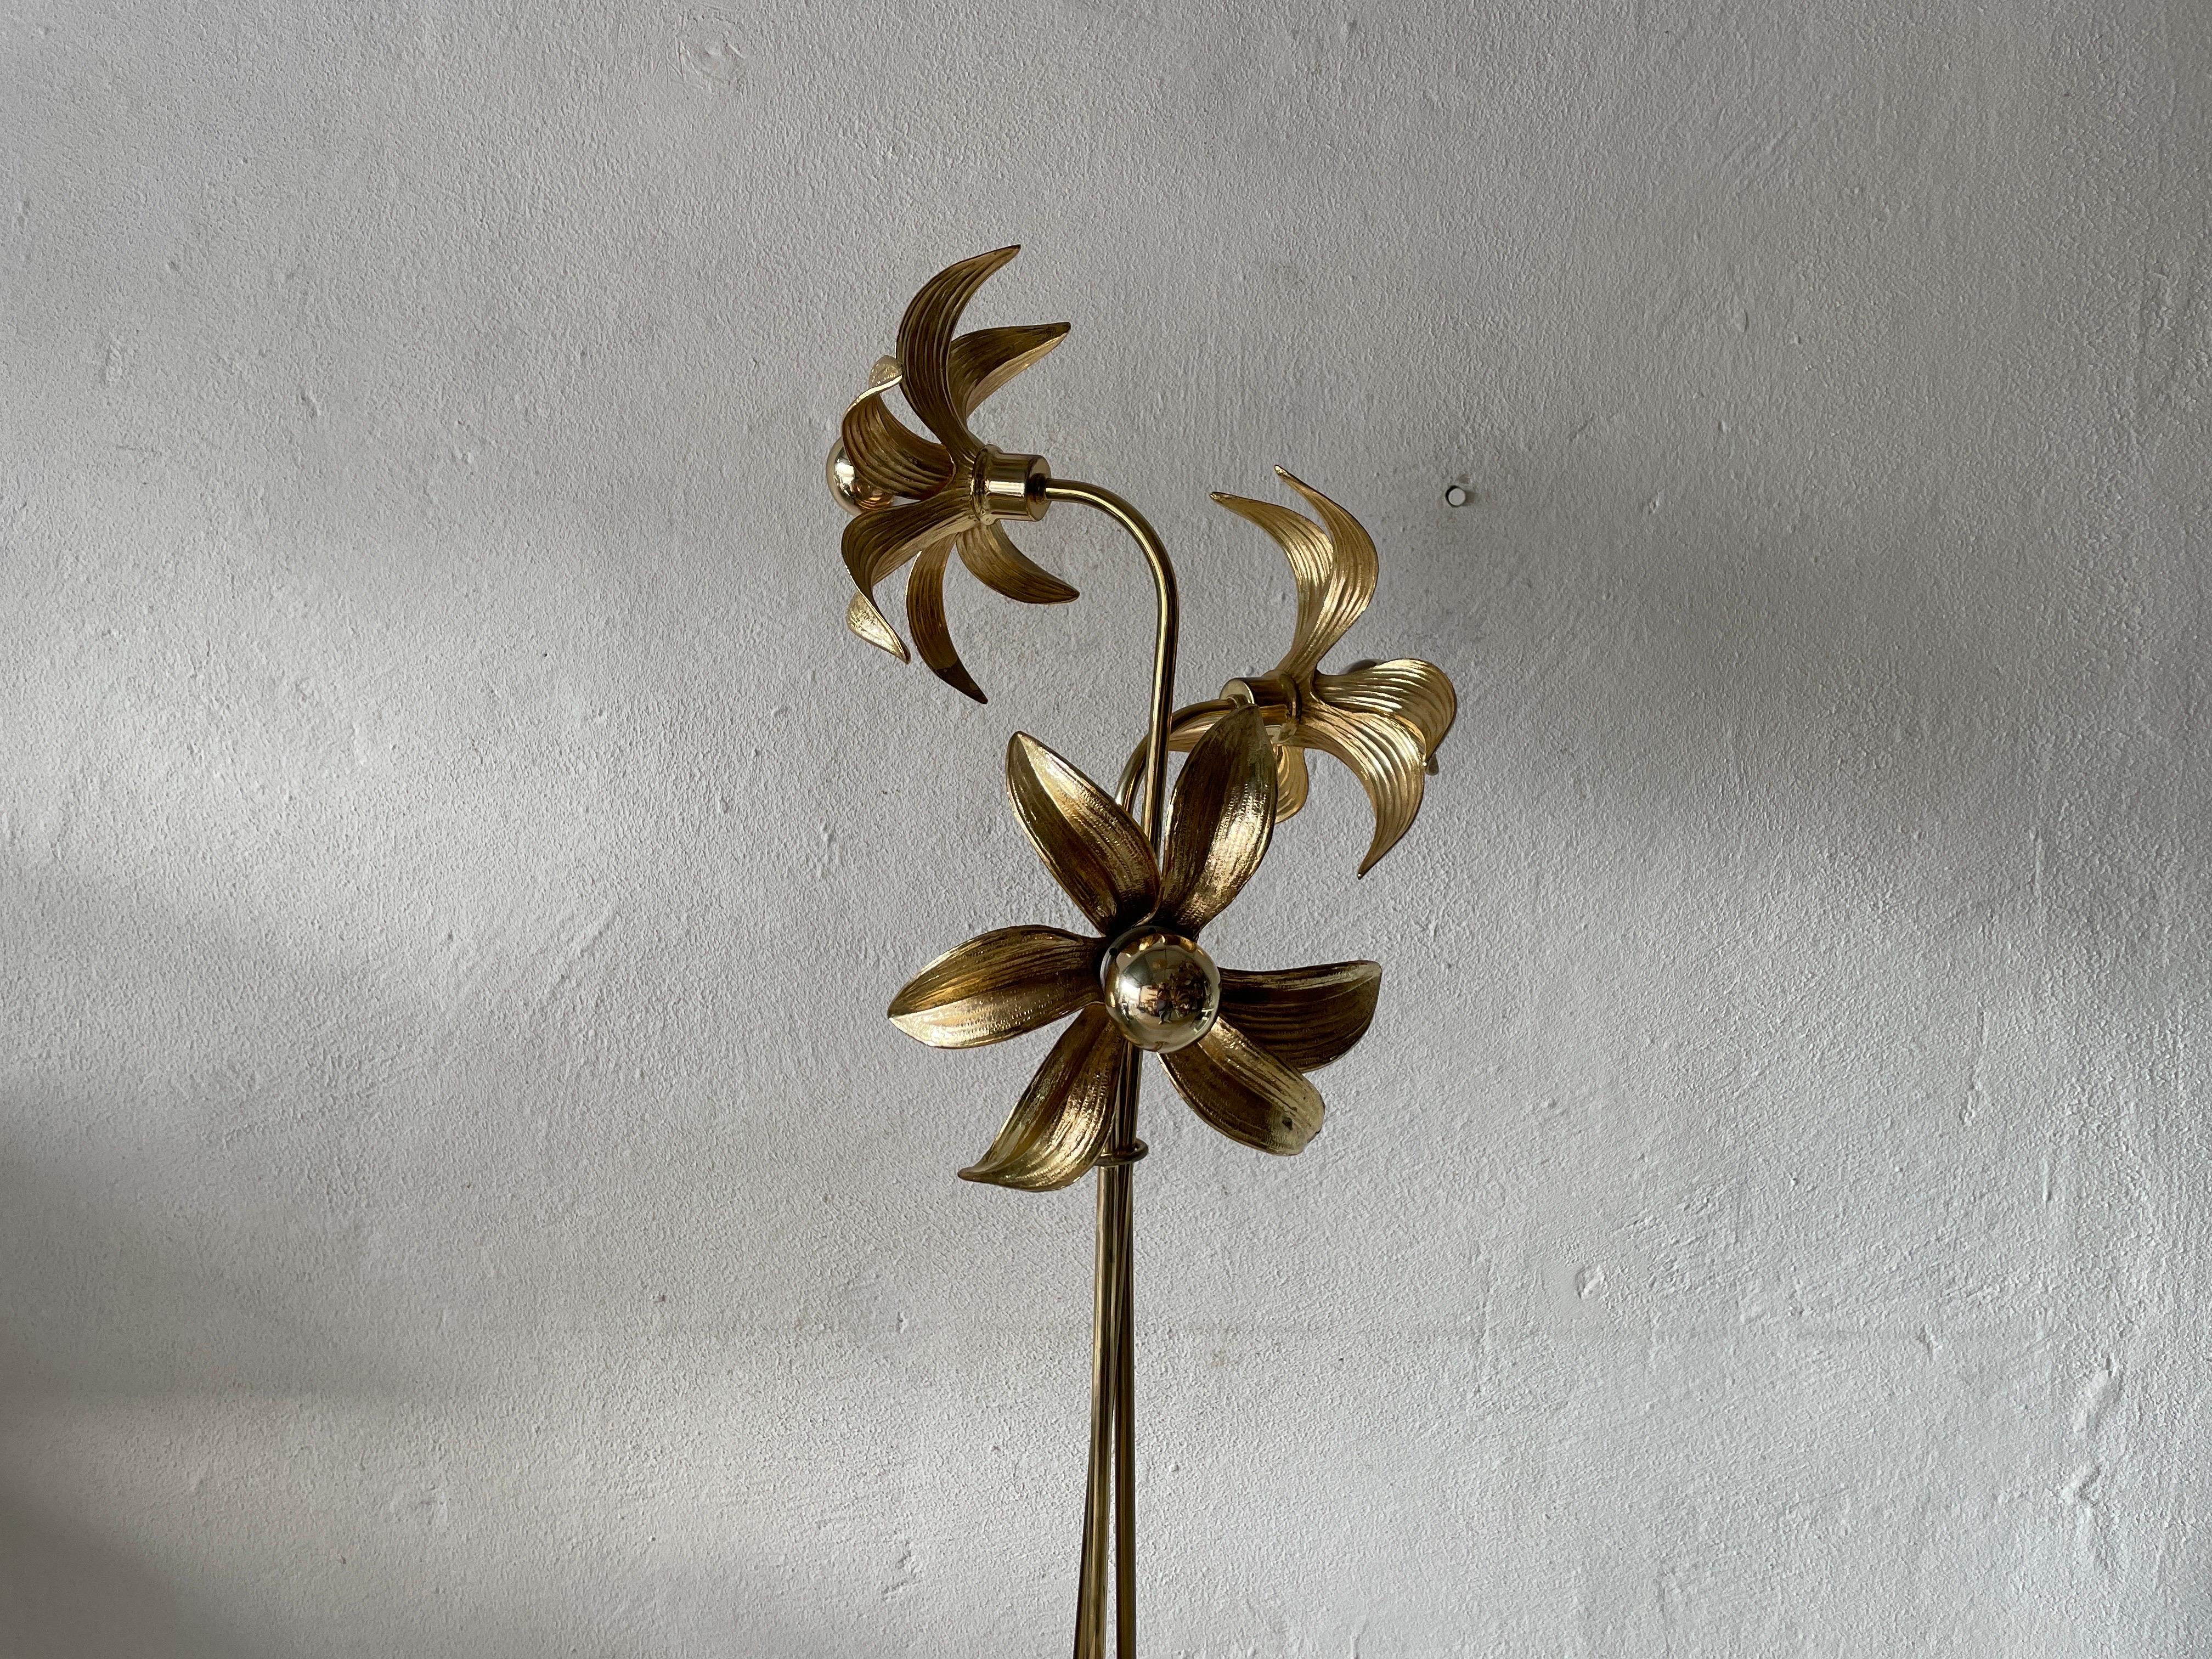 Triple Flower Shade Brass Floor Lamp by Willy Daro for Massive, 1970s, Germany For Sale 10